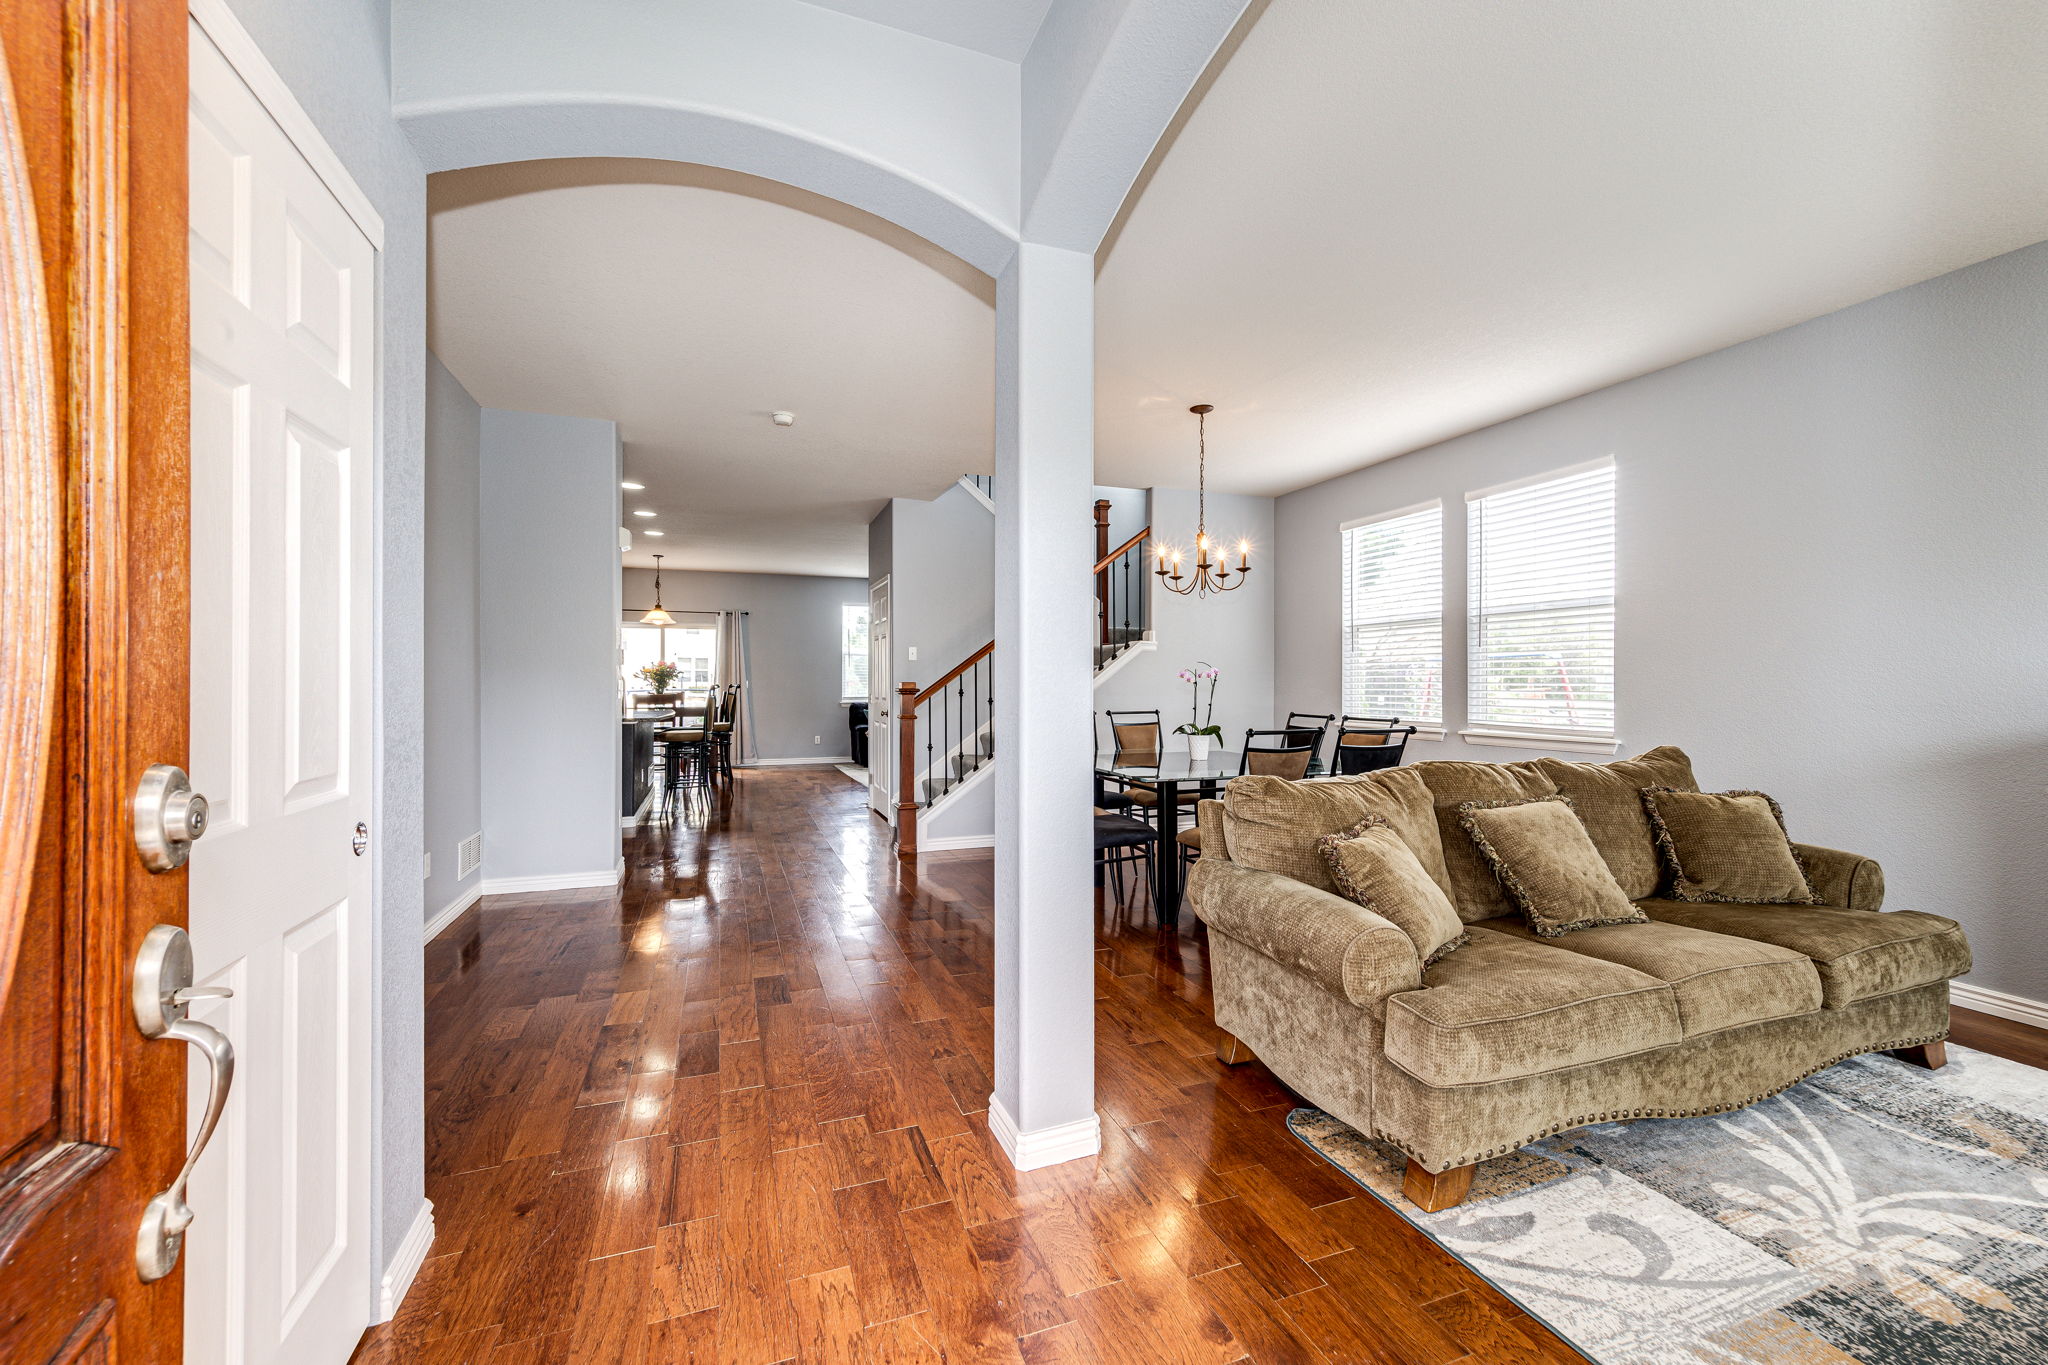 View as you enter with beautiful hardwood floors